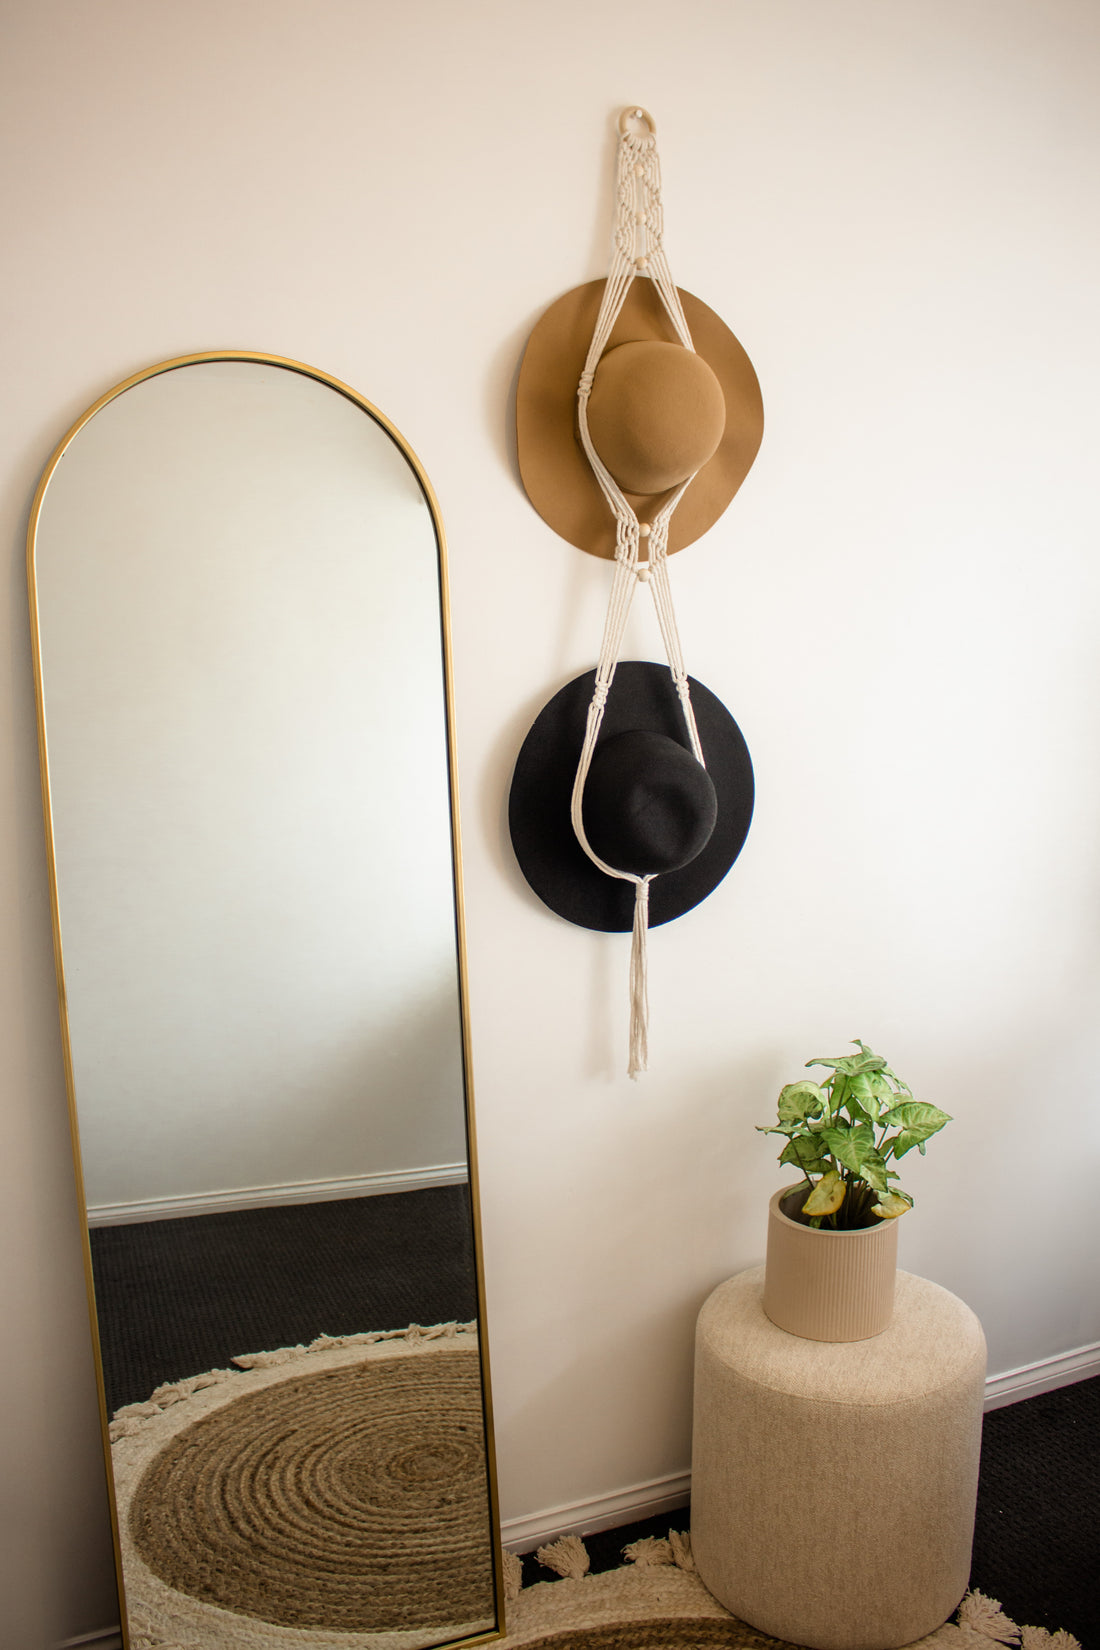 Sage & Twine Blog post about "5 Space-Saving Hat Hanger Macrame Solutions for Small Spaces"